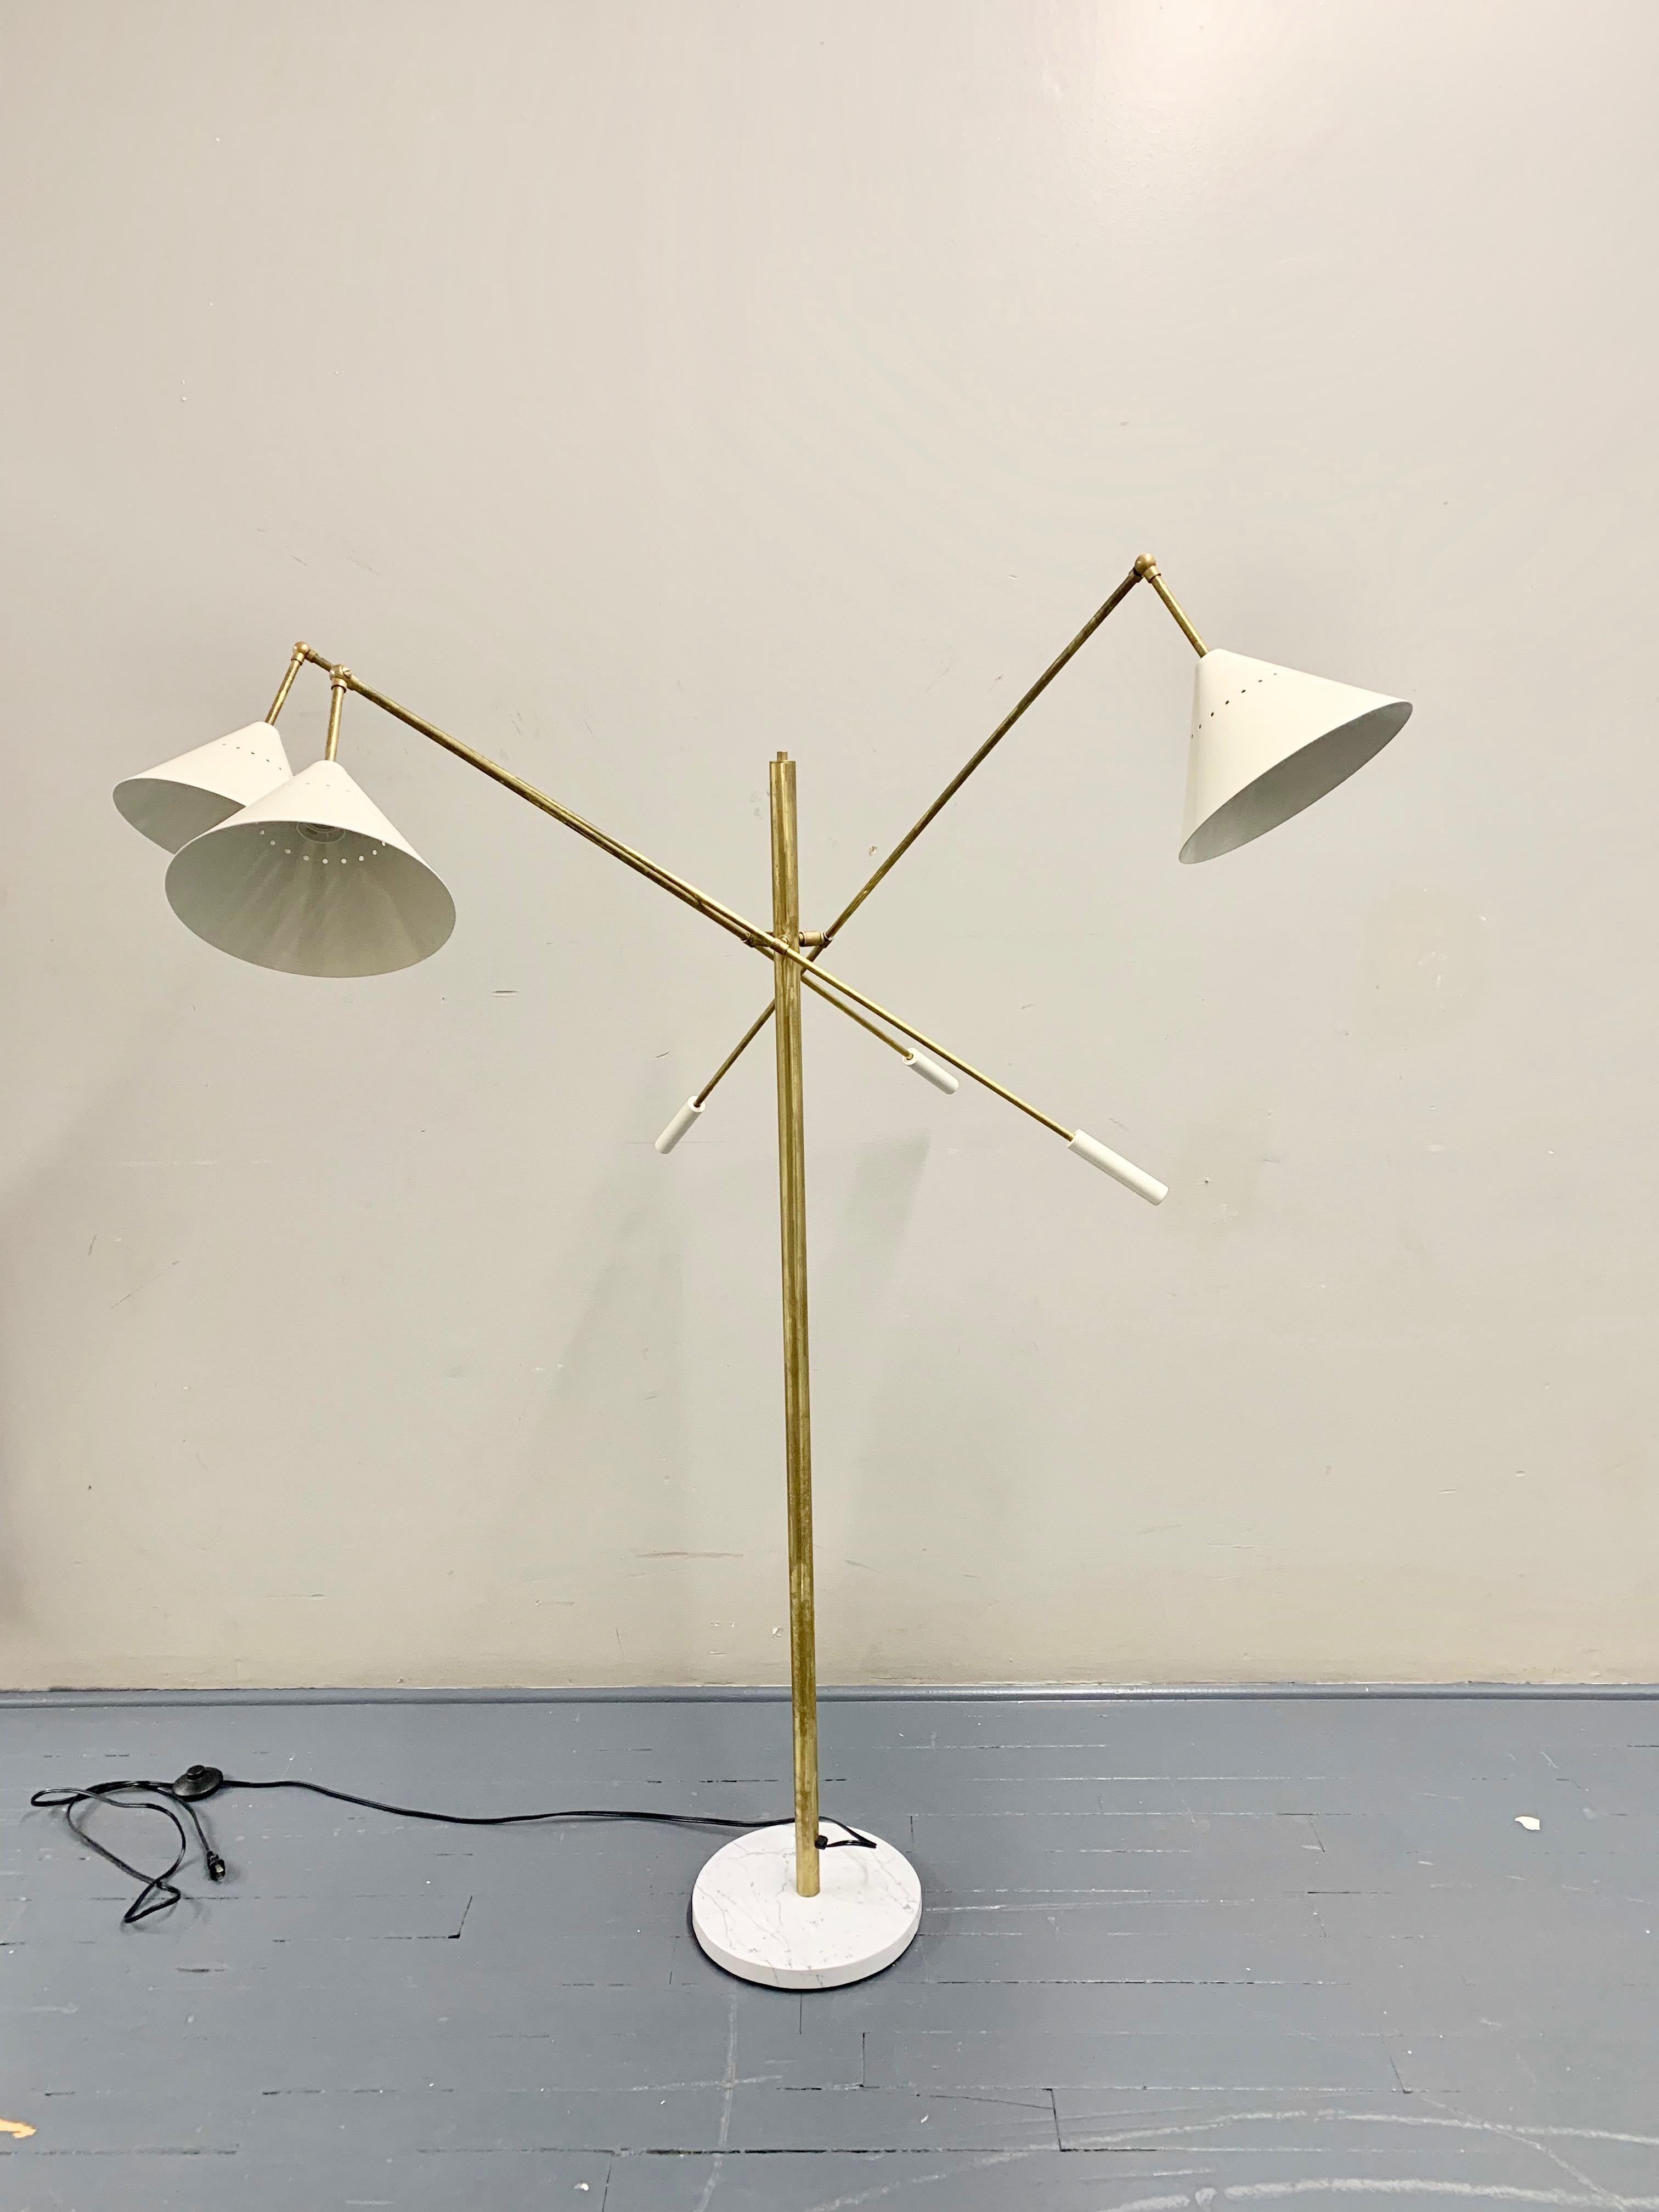 Italian midcentury style floor lamp adjustable three-arm lamp ‘Triennale’ style. Conical shades white, Carrara marble base, arms and body made of solid brass and hand wax painted. Each arm features counter weights of the same color of the shades.
